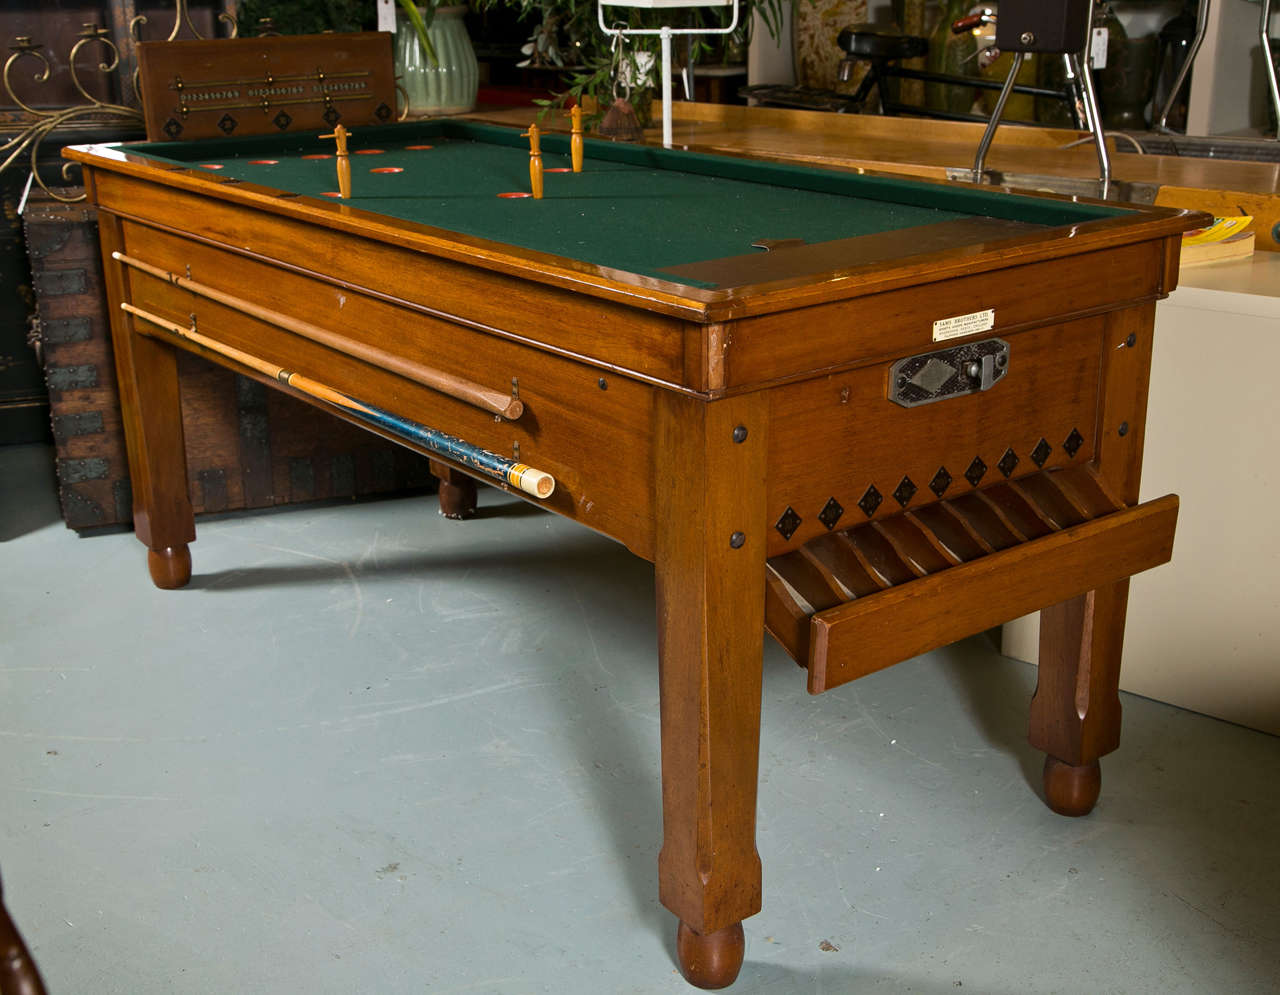 Coin operated English billiard table by Sam Brothers, Hoddesdon , England. Gill Jelkes convinced the English manufacturer to make a version of this game in bar size and was created in Oxford 1936.  They called the legs Jelkes (